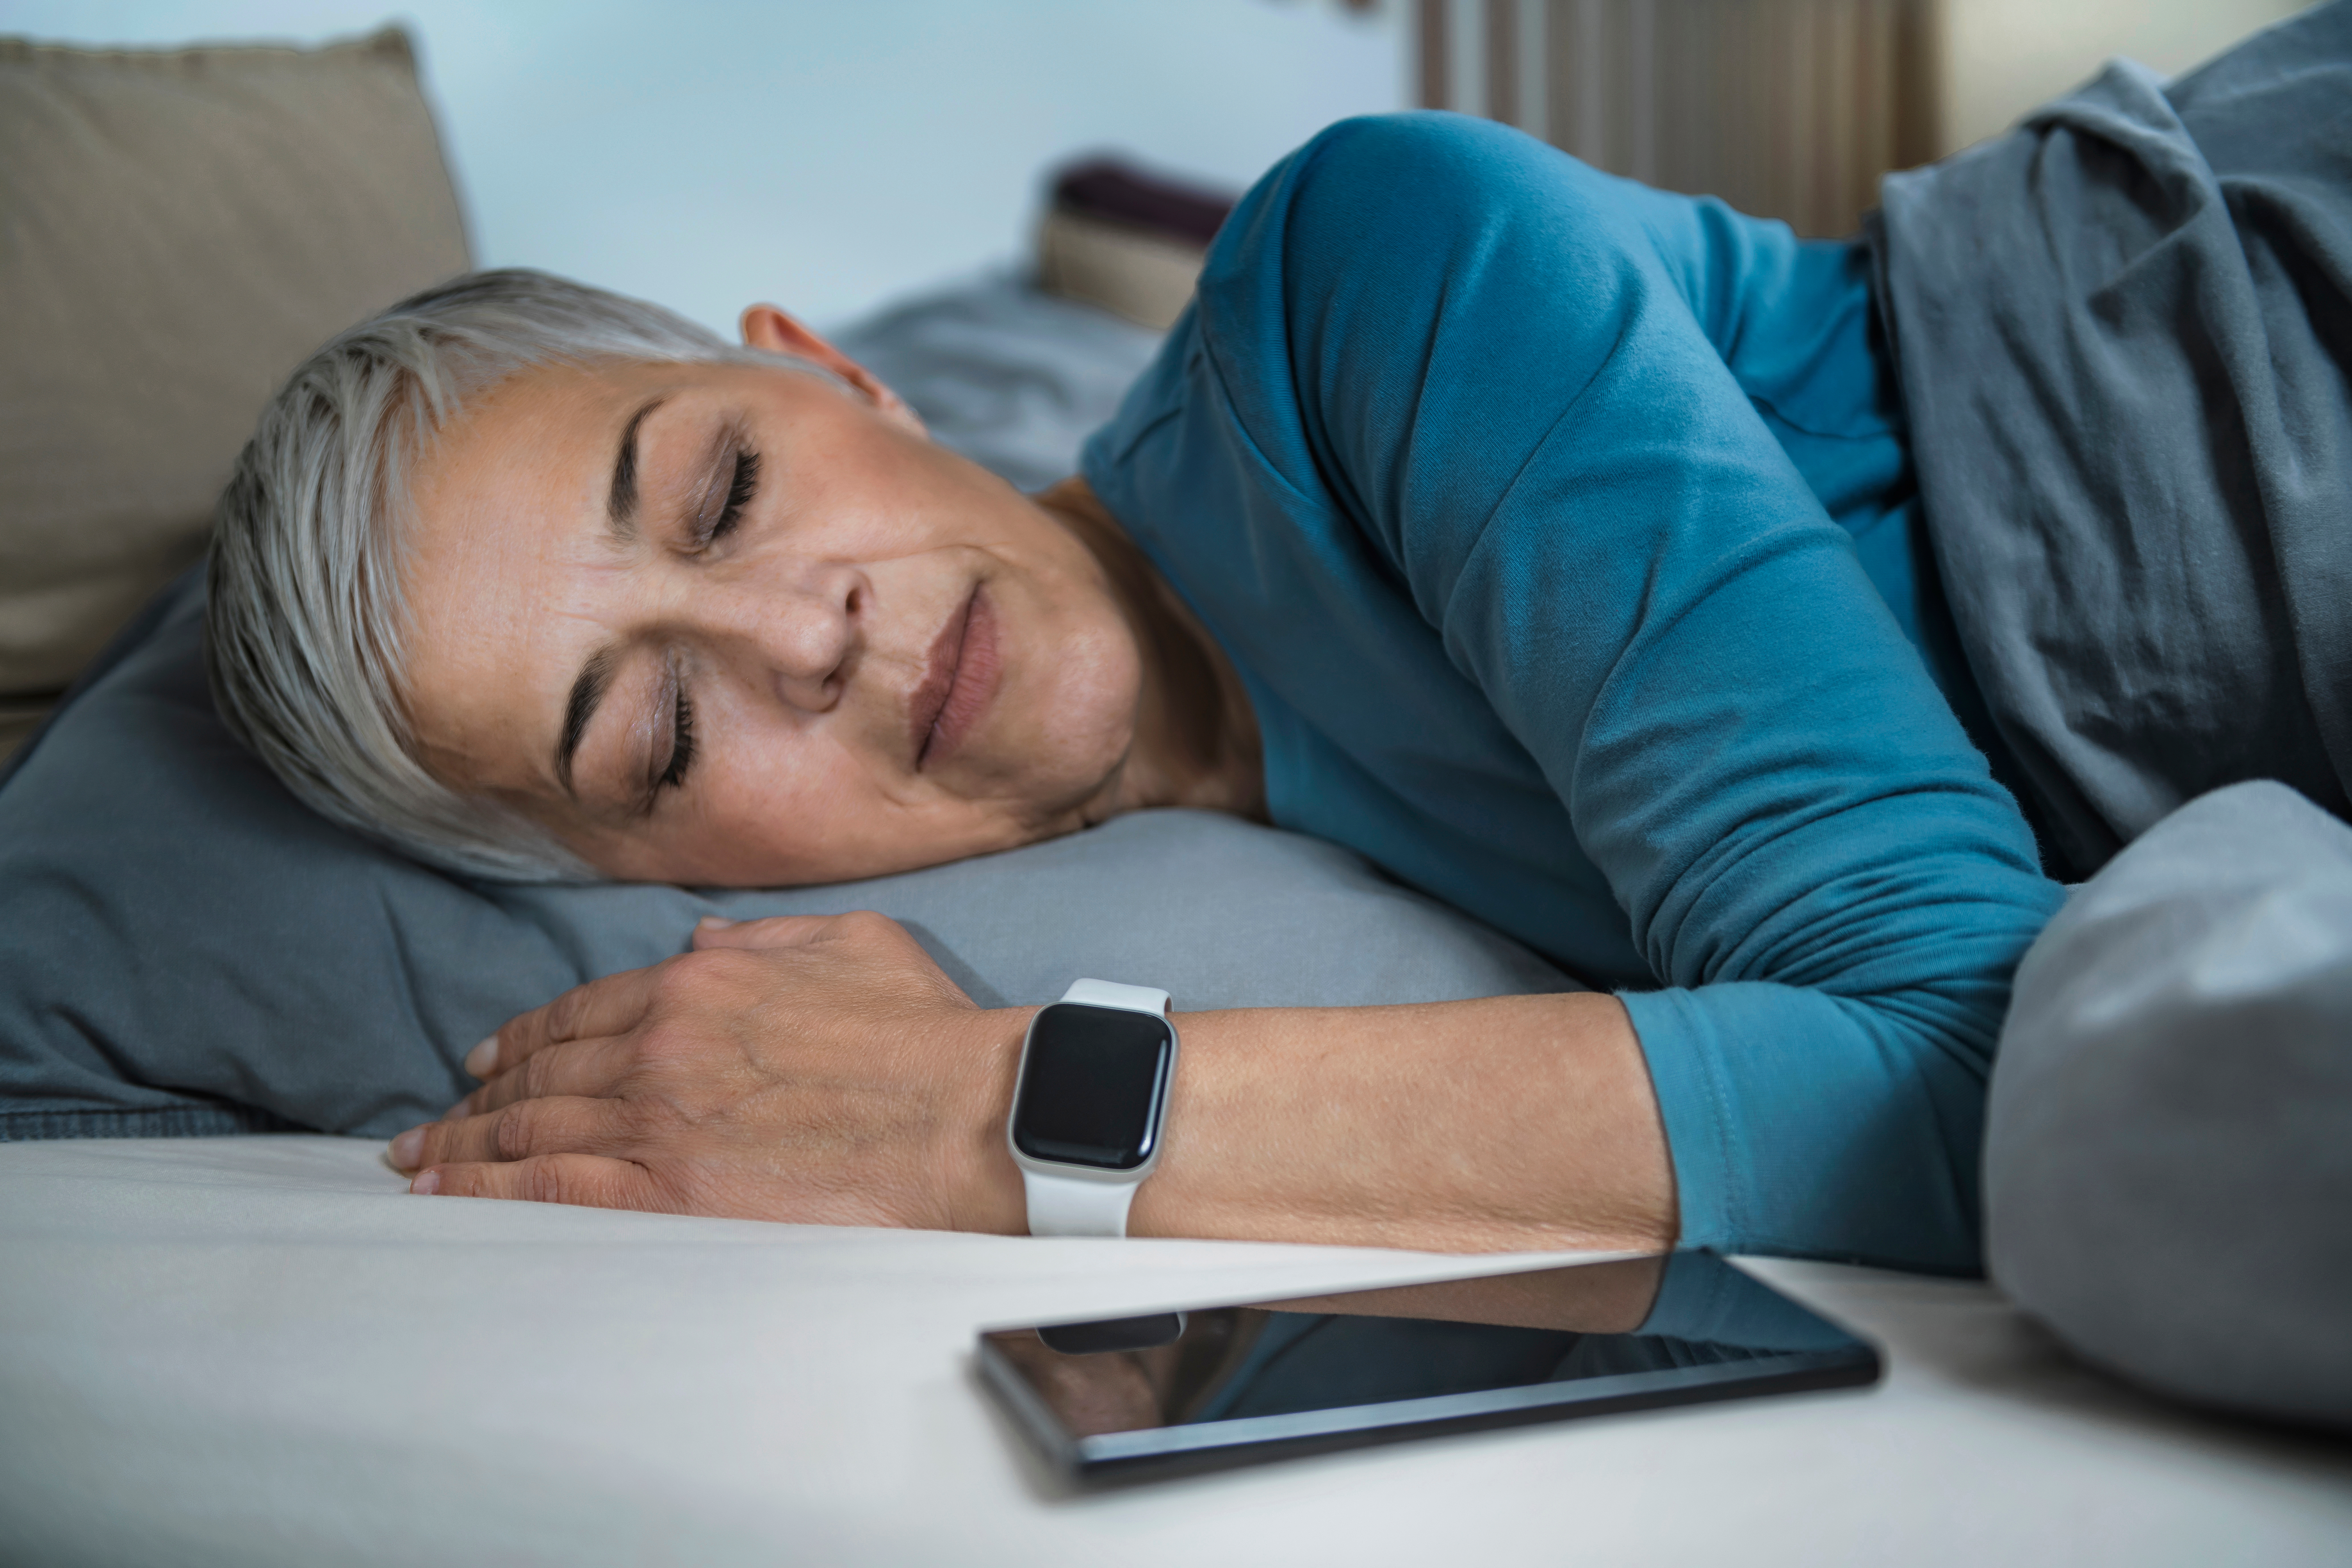 Sleeping woman wearing an Apple Watch with a phone next to her